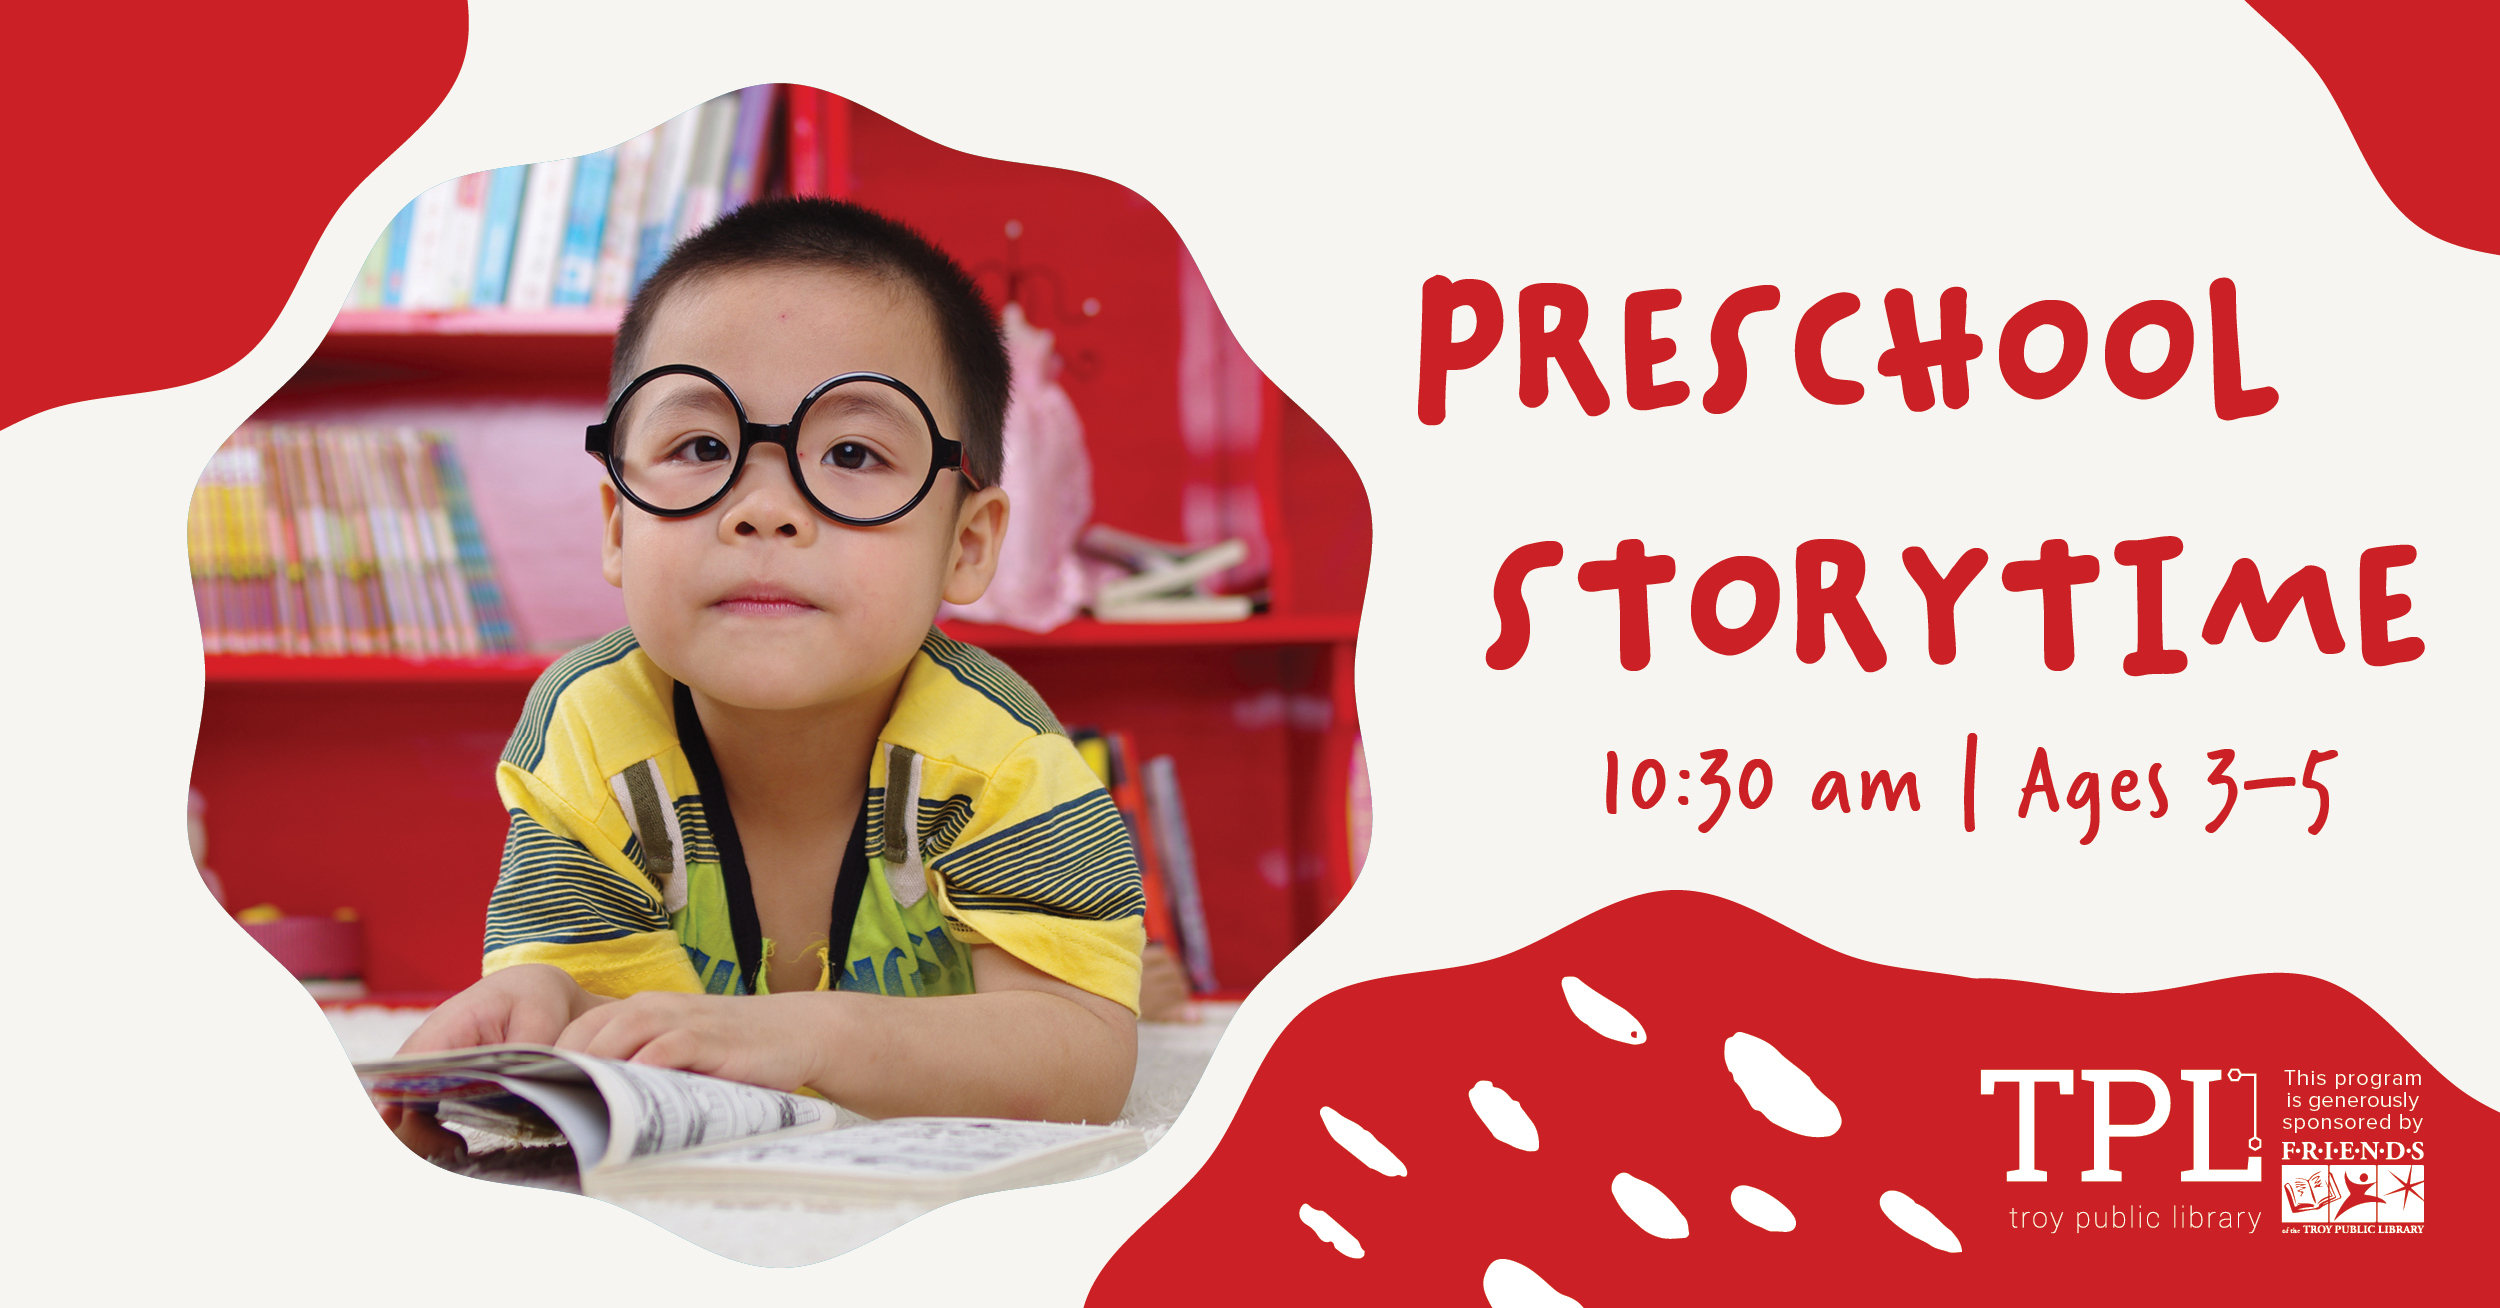 Preschool Storytime 10:30am. Ages 3 to 5. Sponsored by the Friends of the Troy Public Library